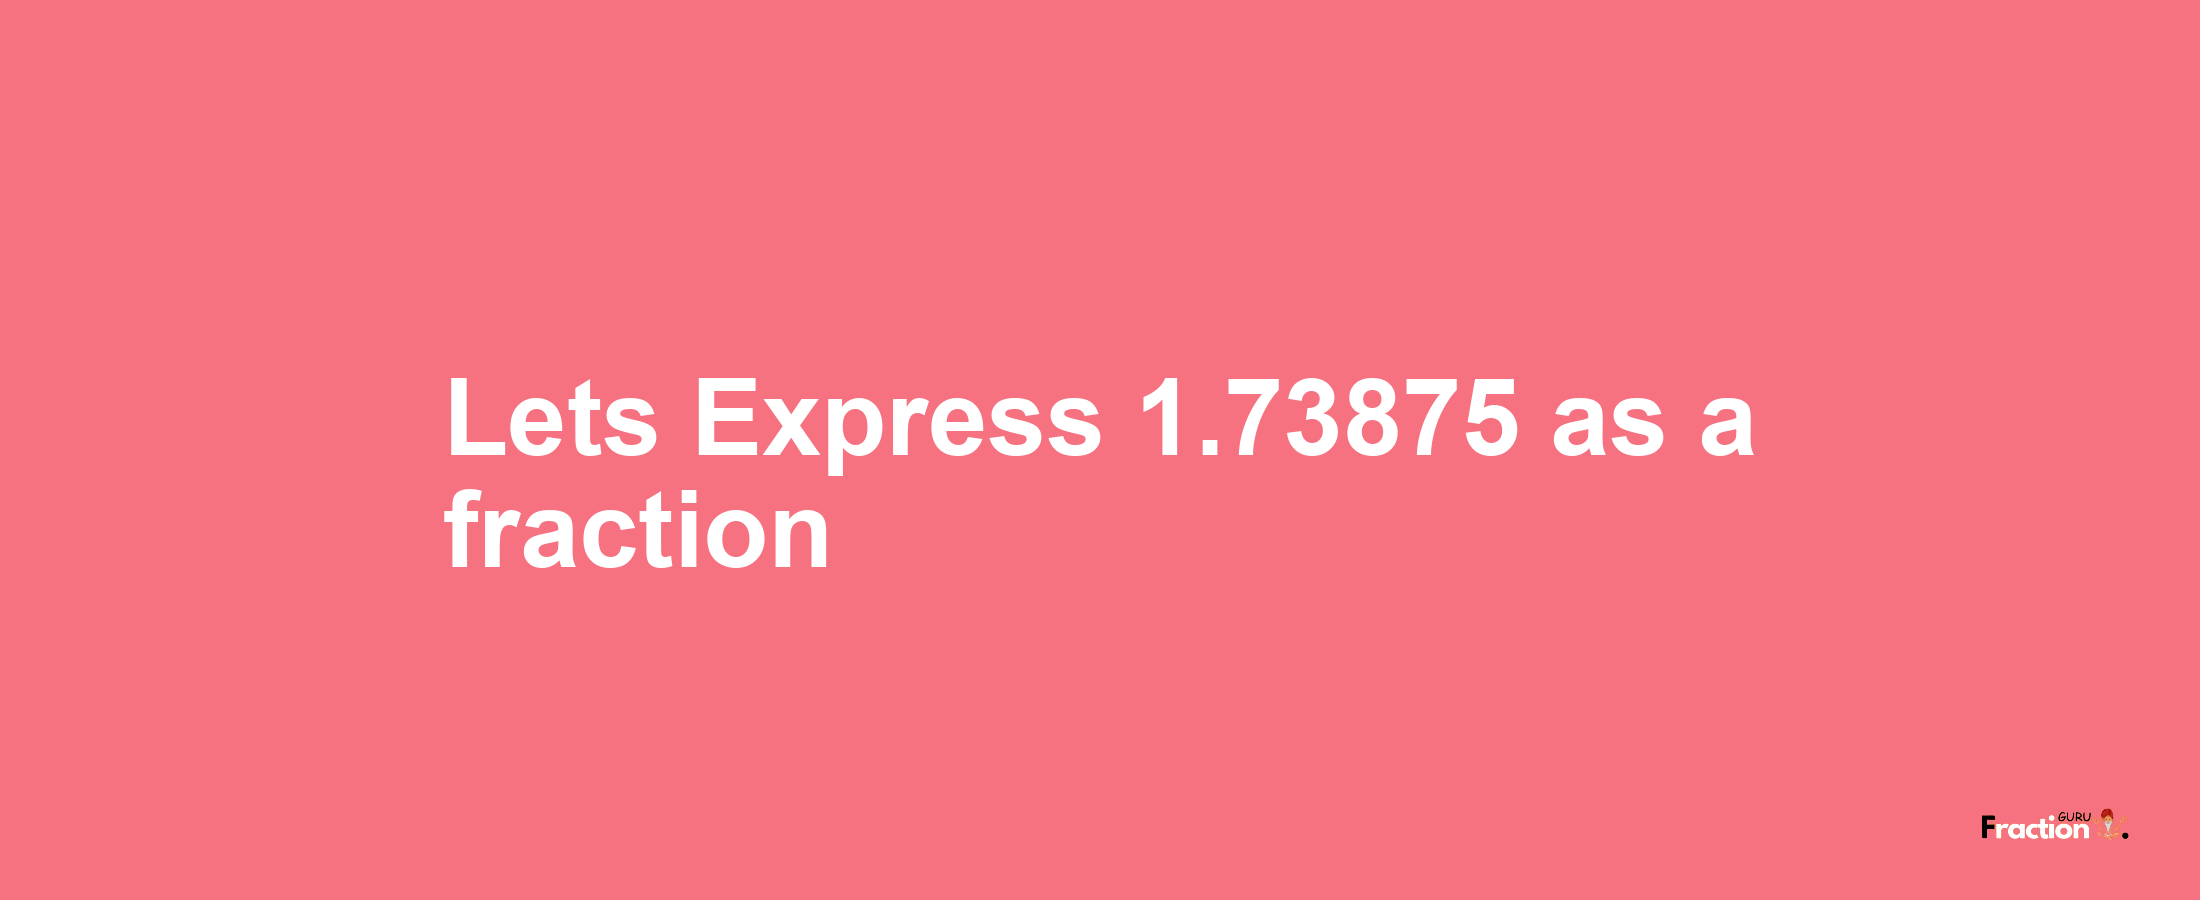 Lets Express 1.73875 as afraction